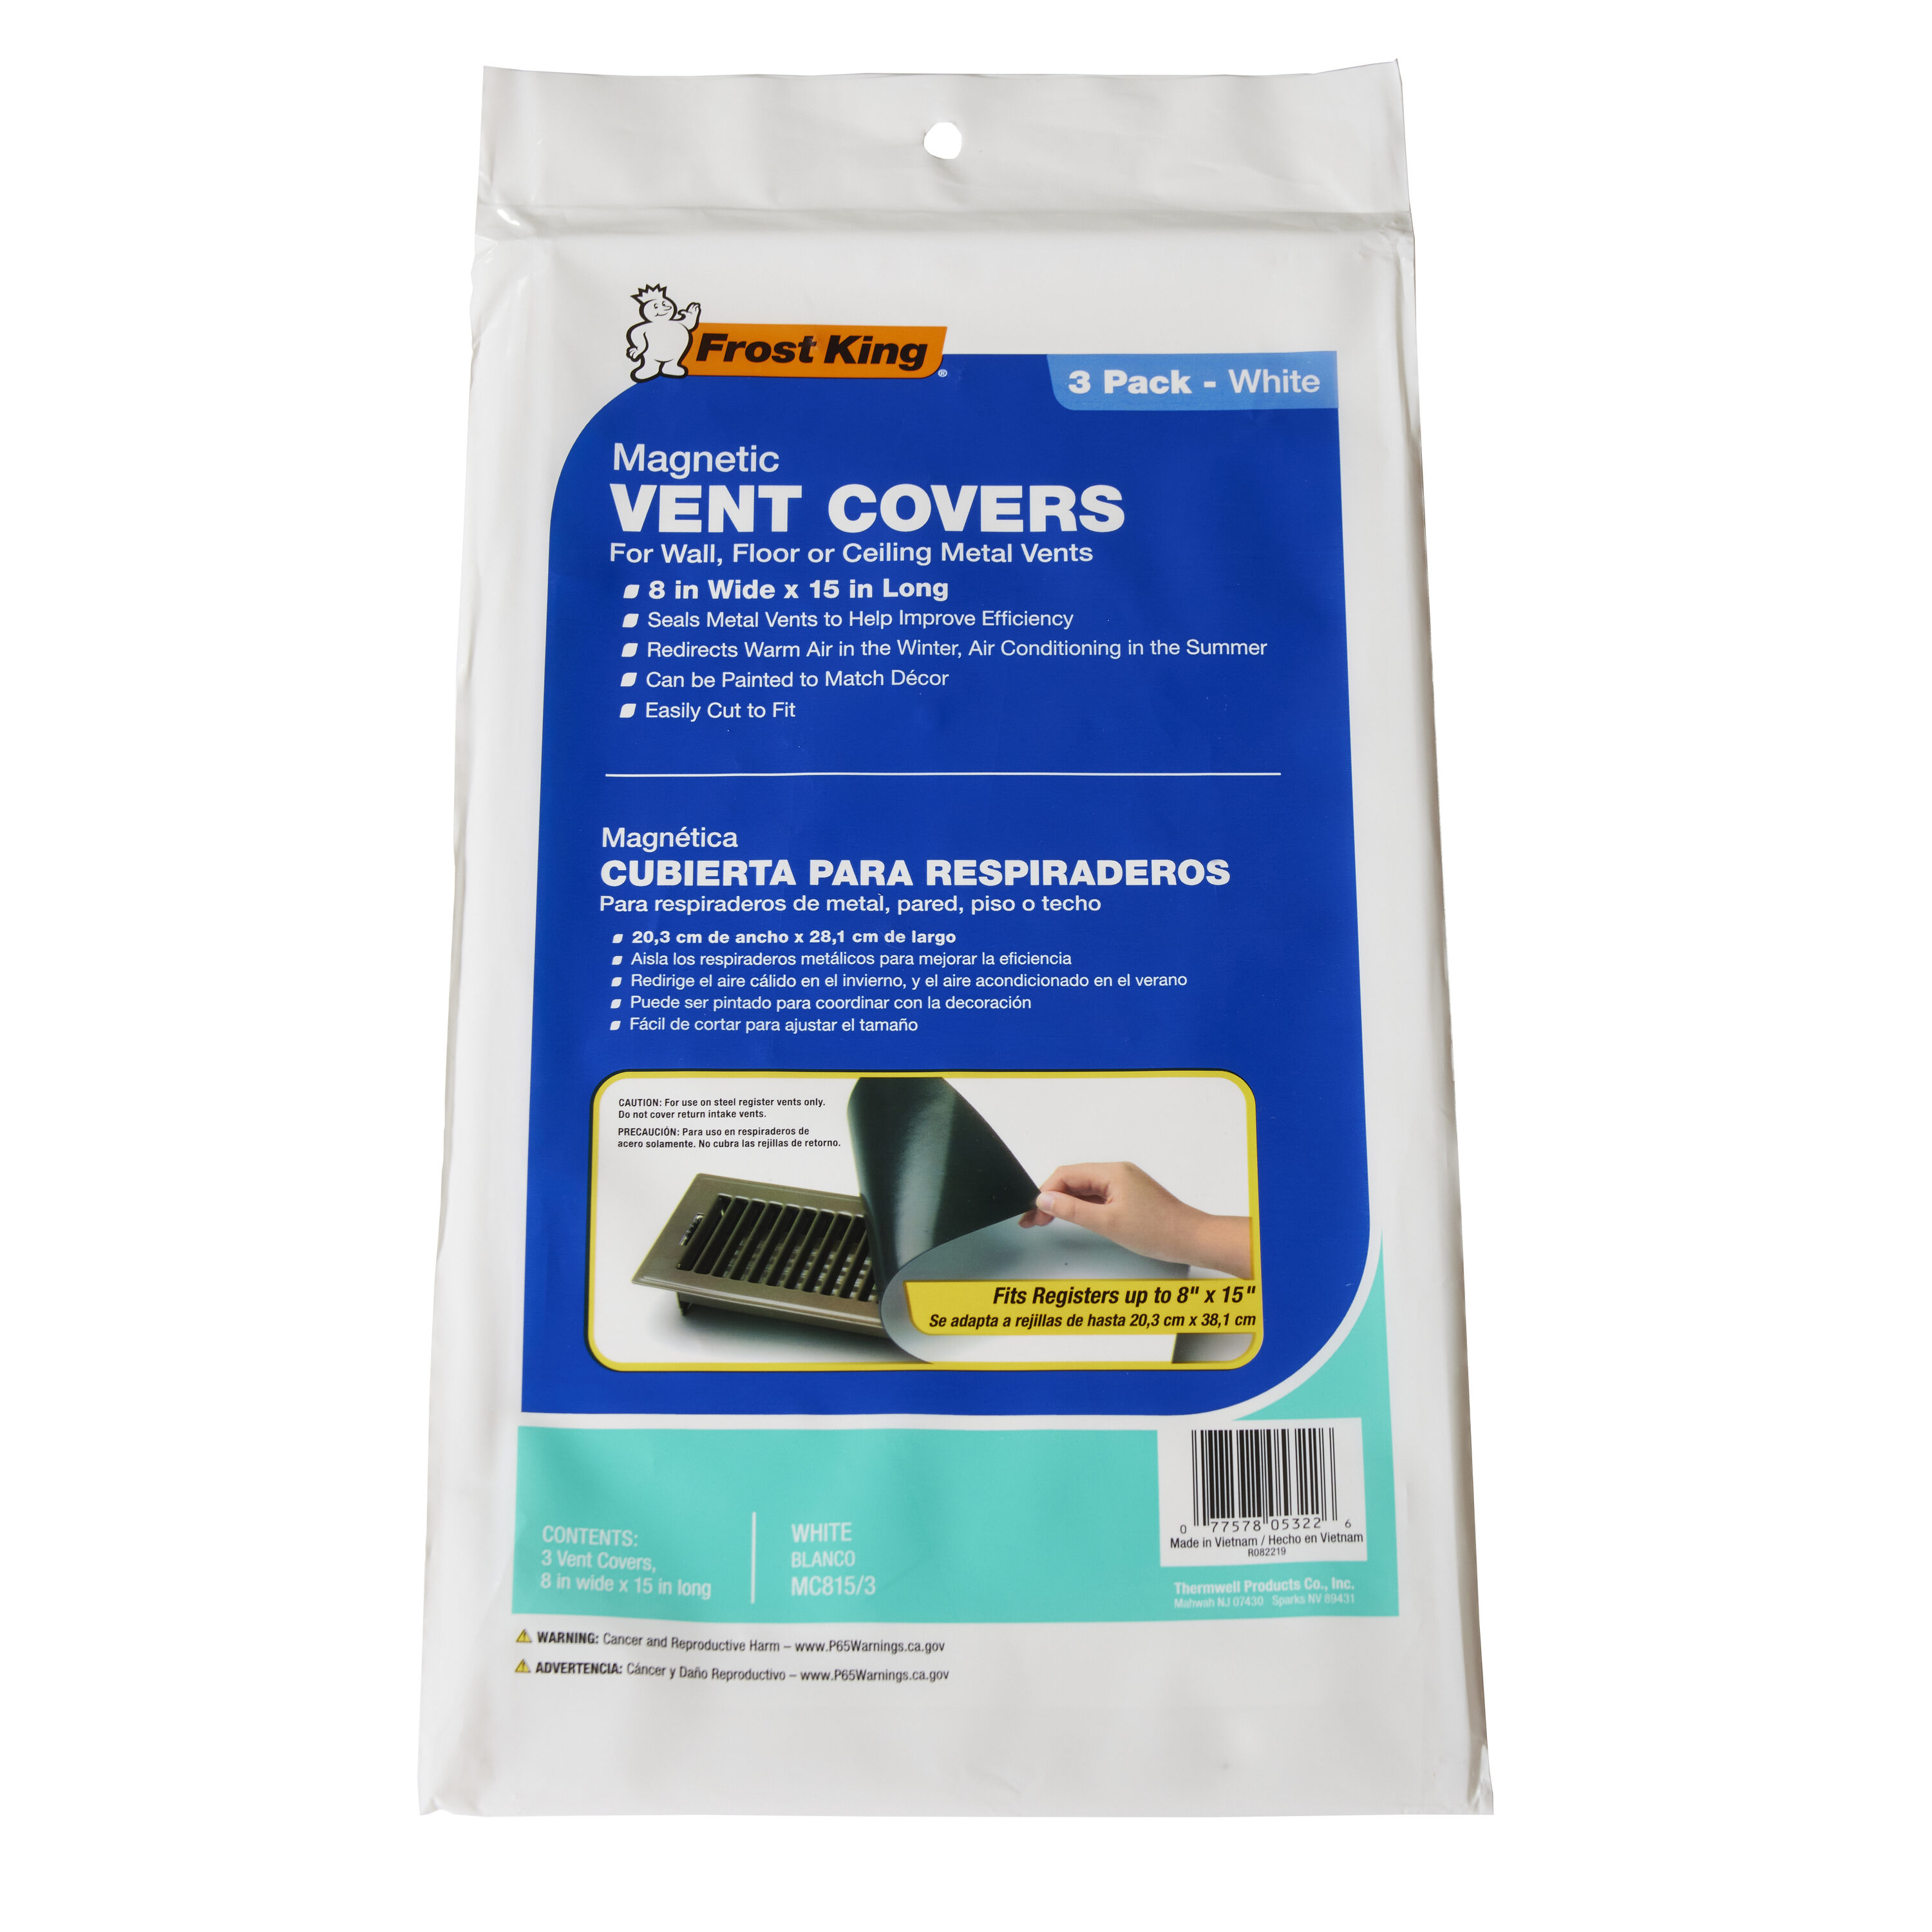 XFasten Magnetic Vent Cover, 8 x 17 (Pack of 5)